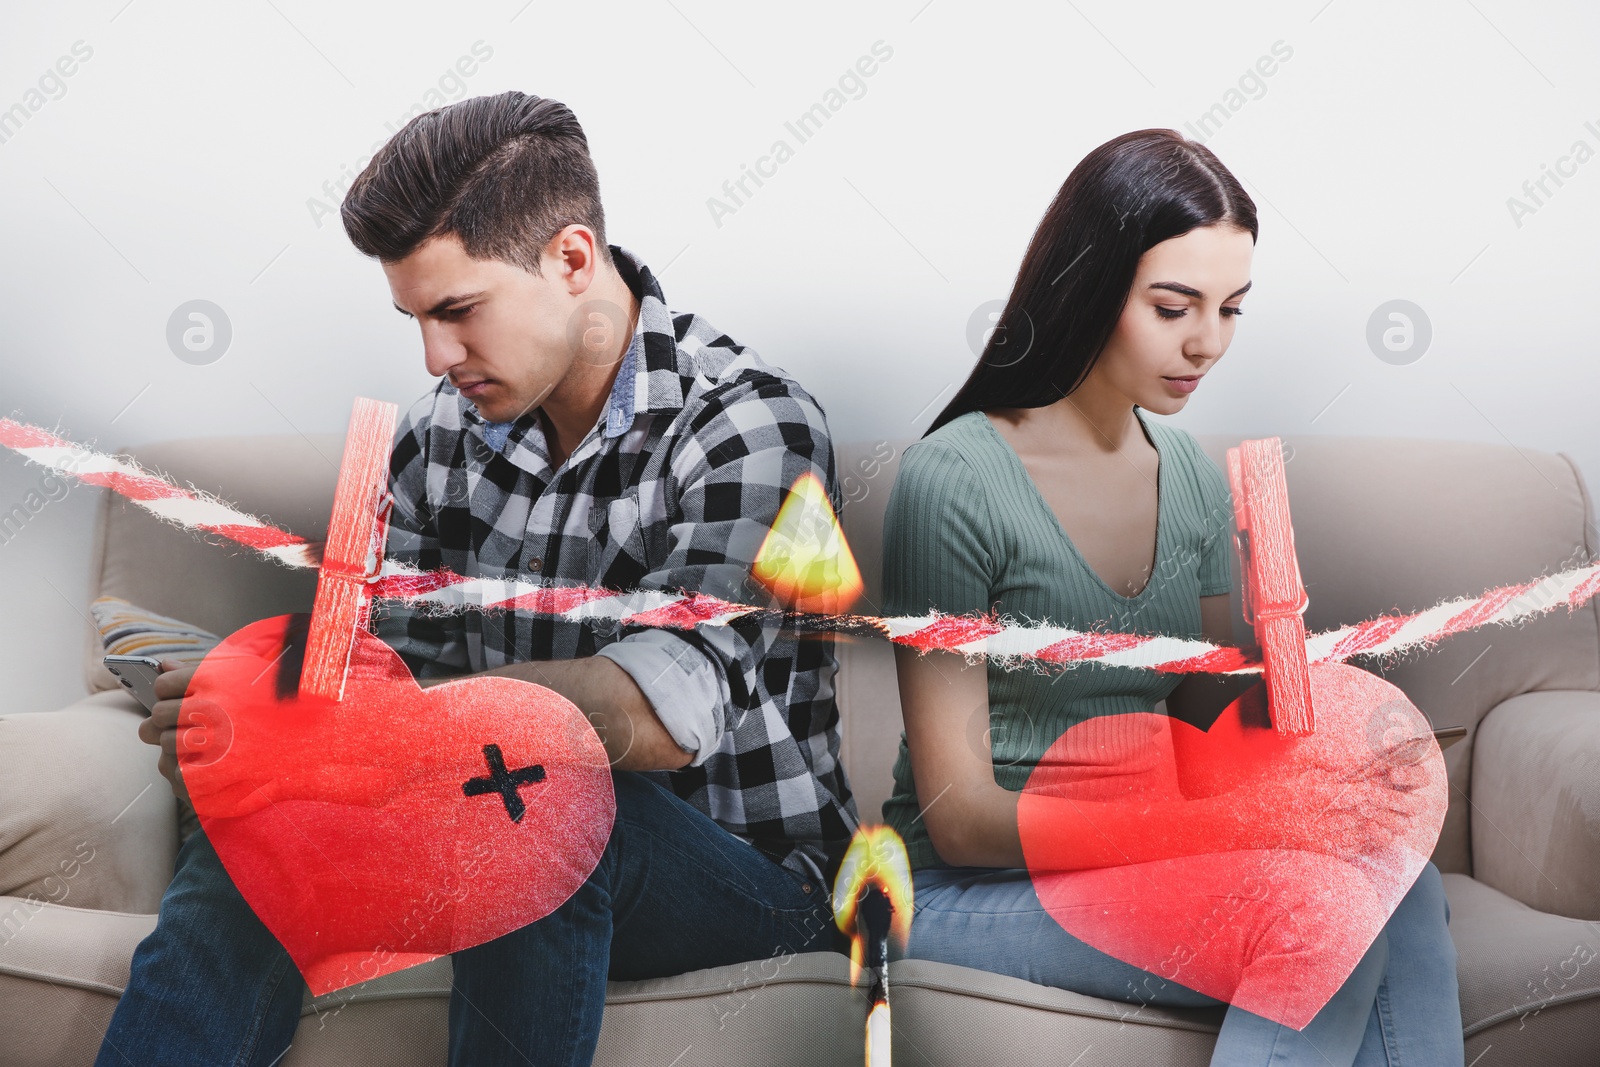 Image of Double exposure of couple addicted to smartphones ignoring each other, red paper hearts on rope and burning match. Relationship problems